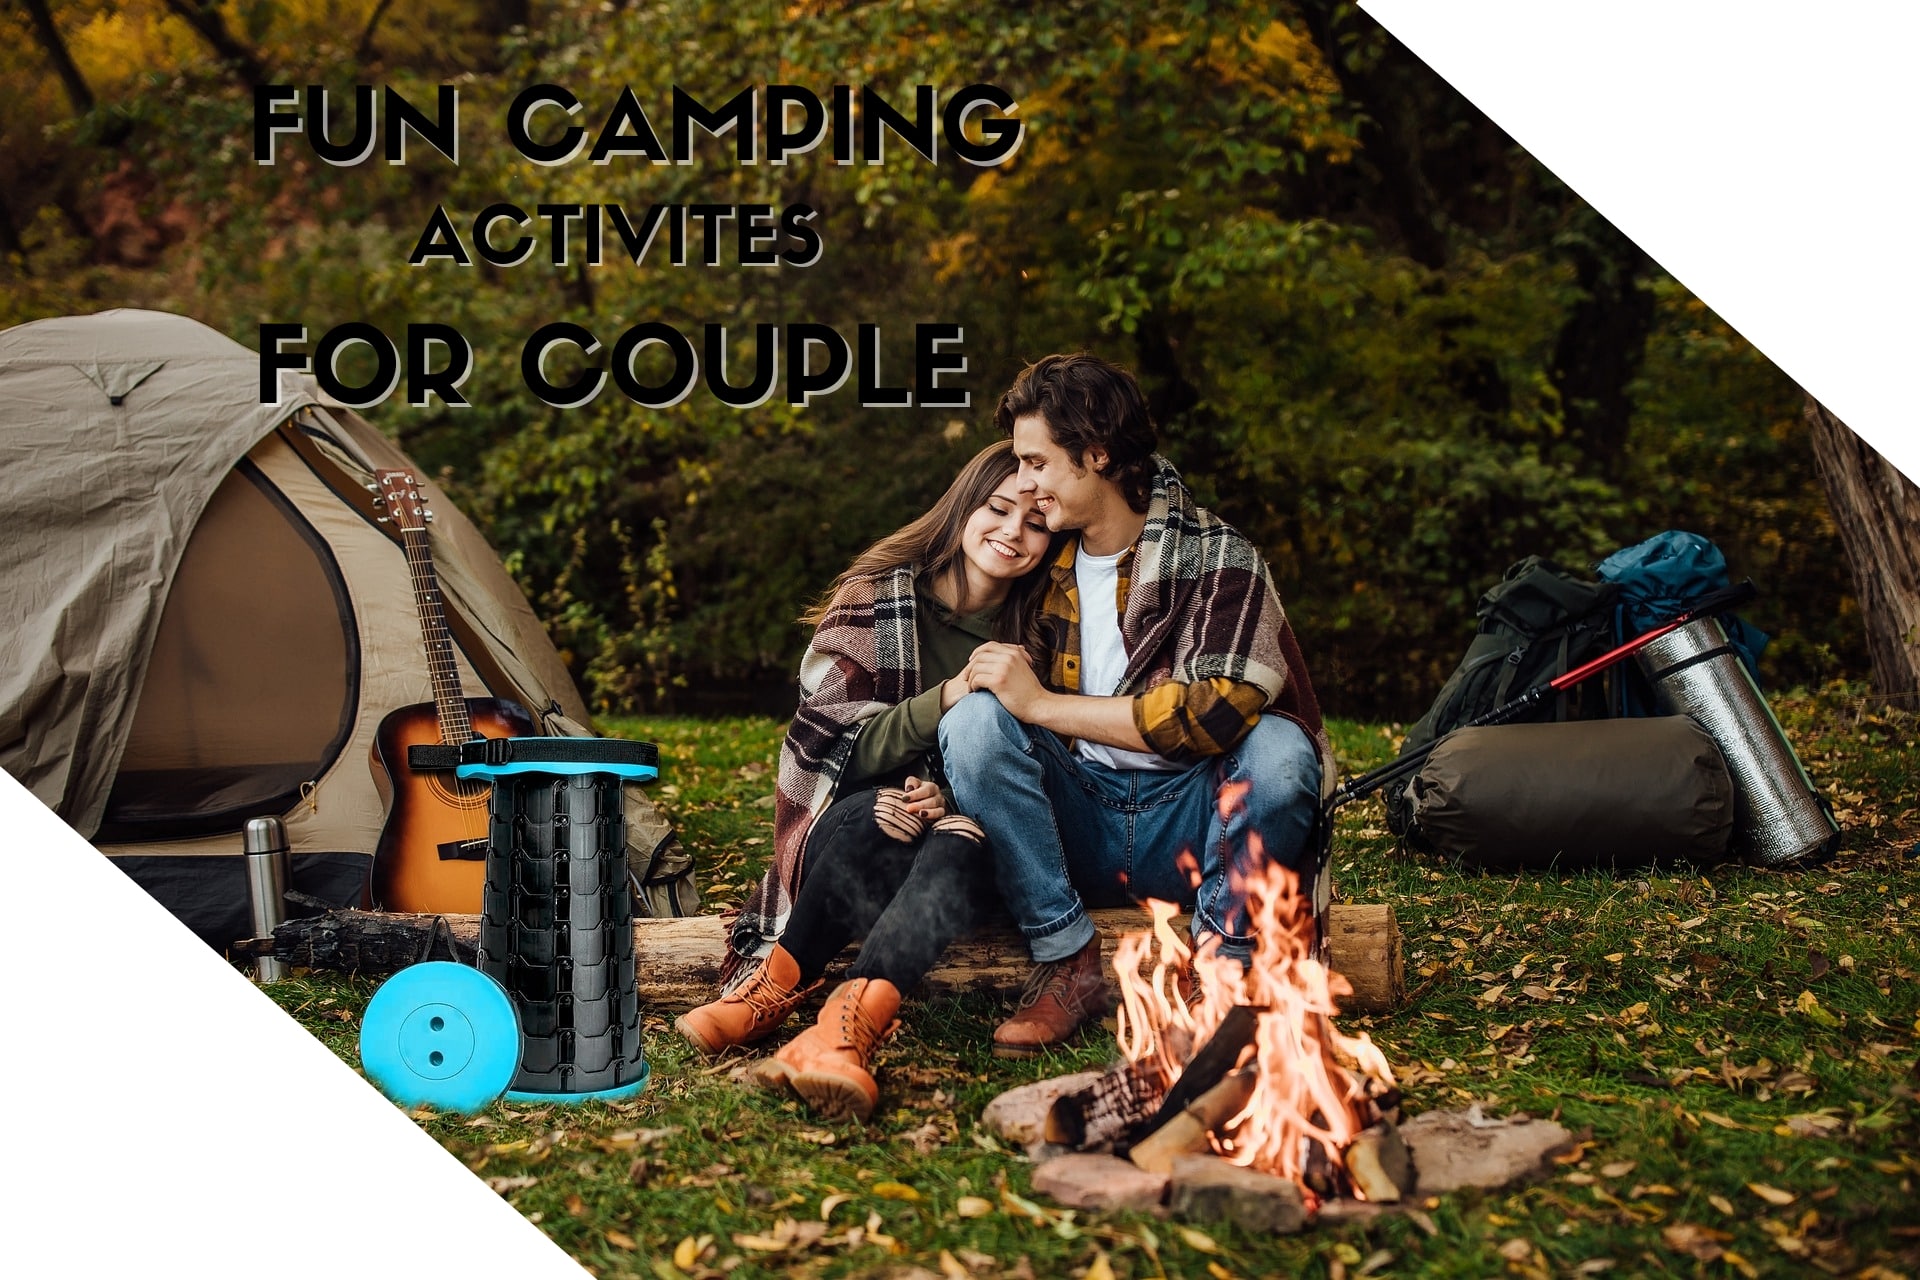 Fun camping activities for couples